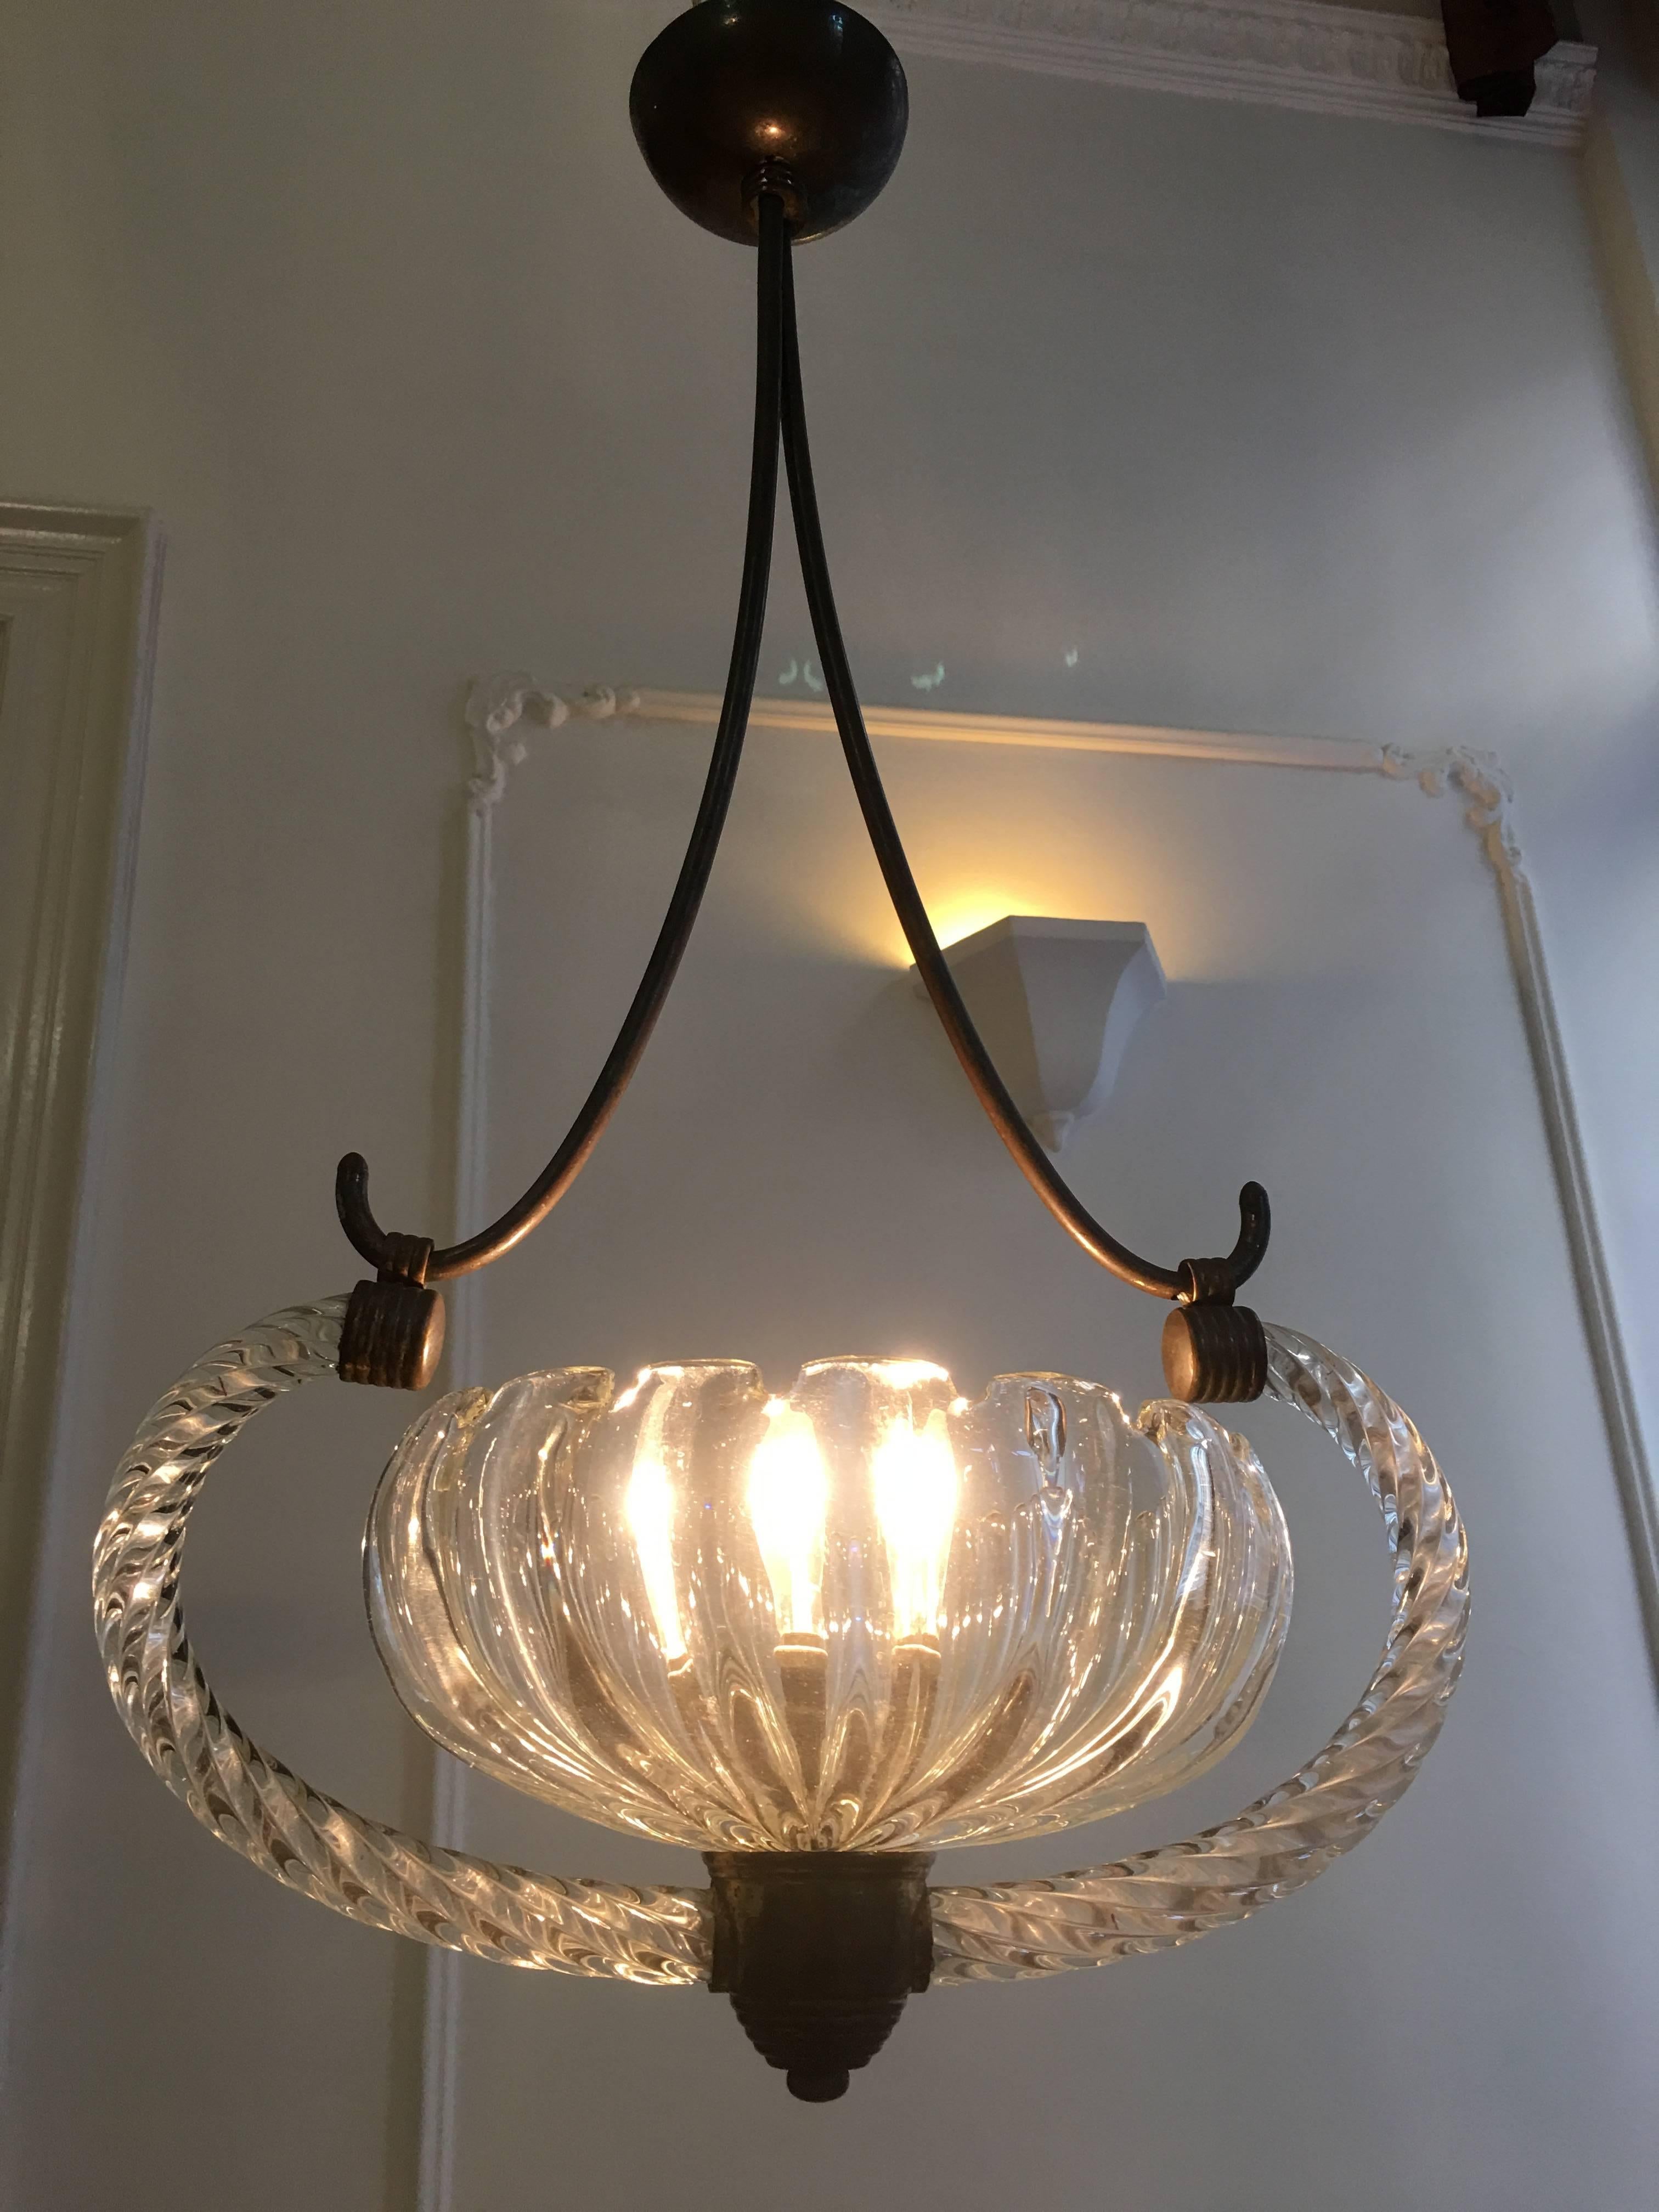 Mid-20th Century Chandelier Art Deco by Ercole Barovier, 1940s For Sale